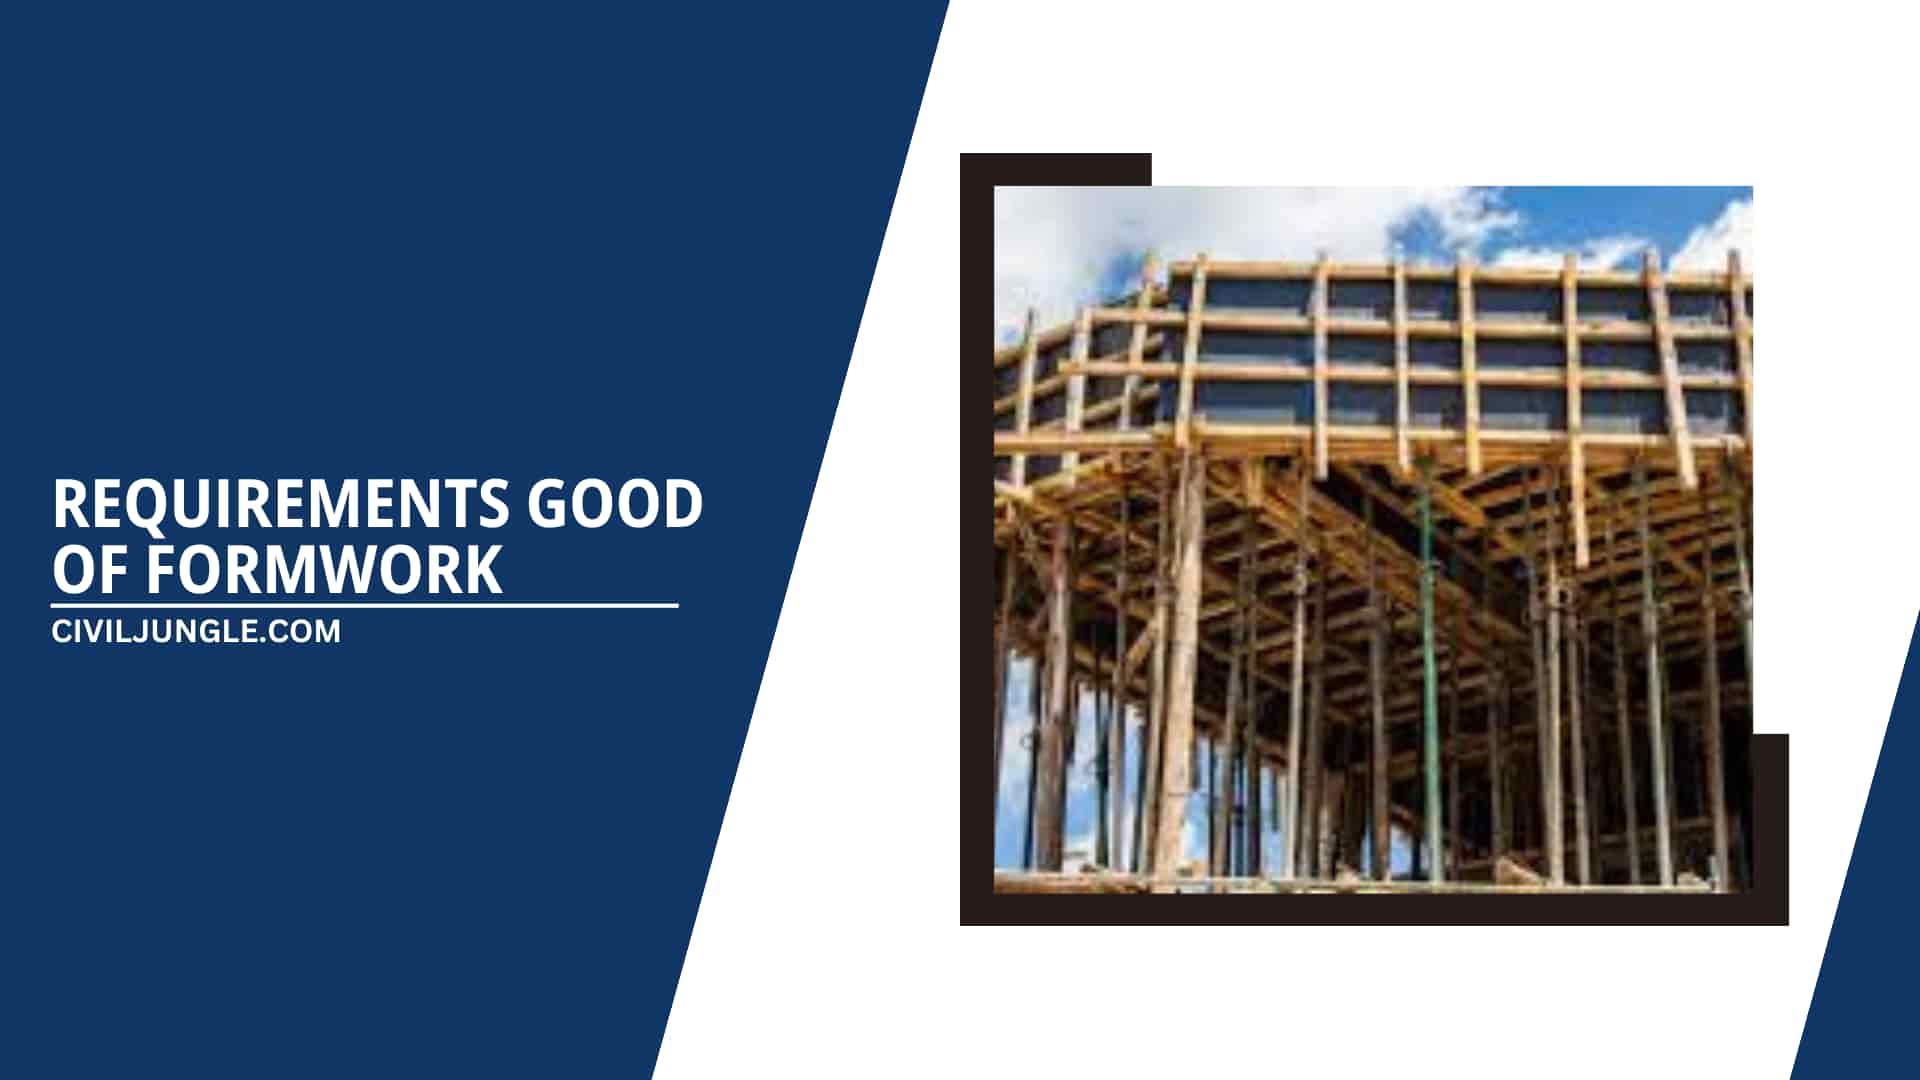 Requirements Good of Formwork